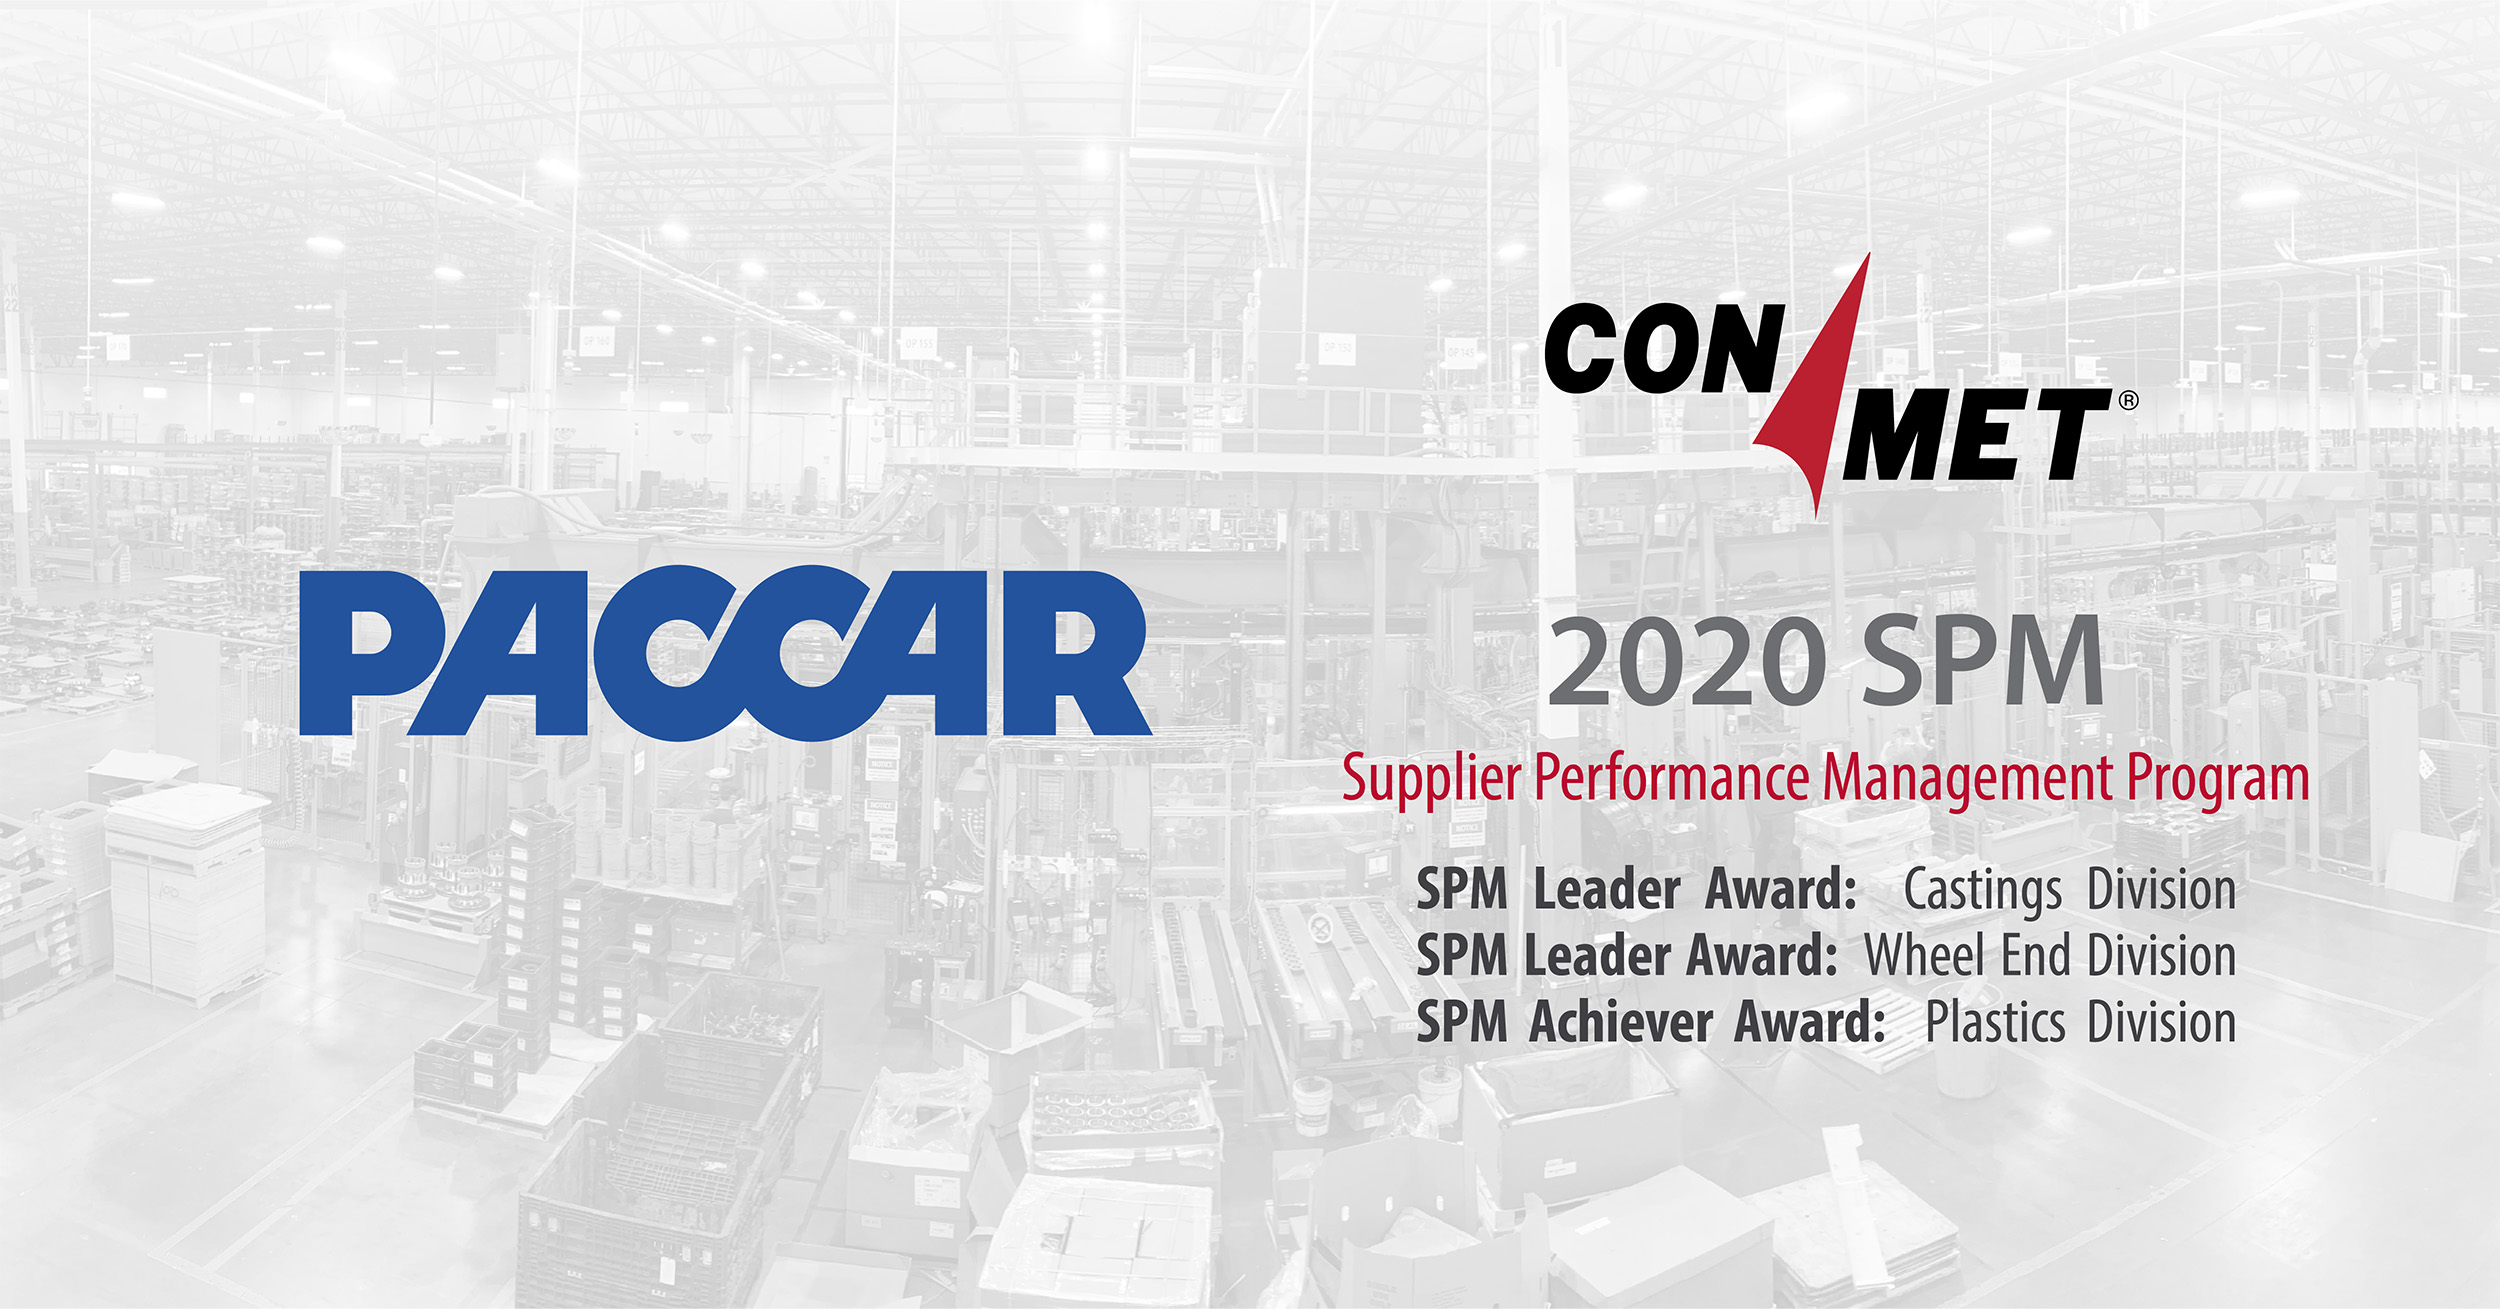 ConMet Wins PACCAR’s SPM Awards Across All Business Units